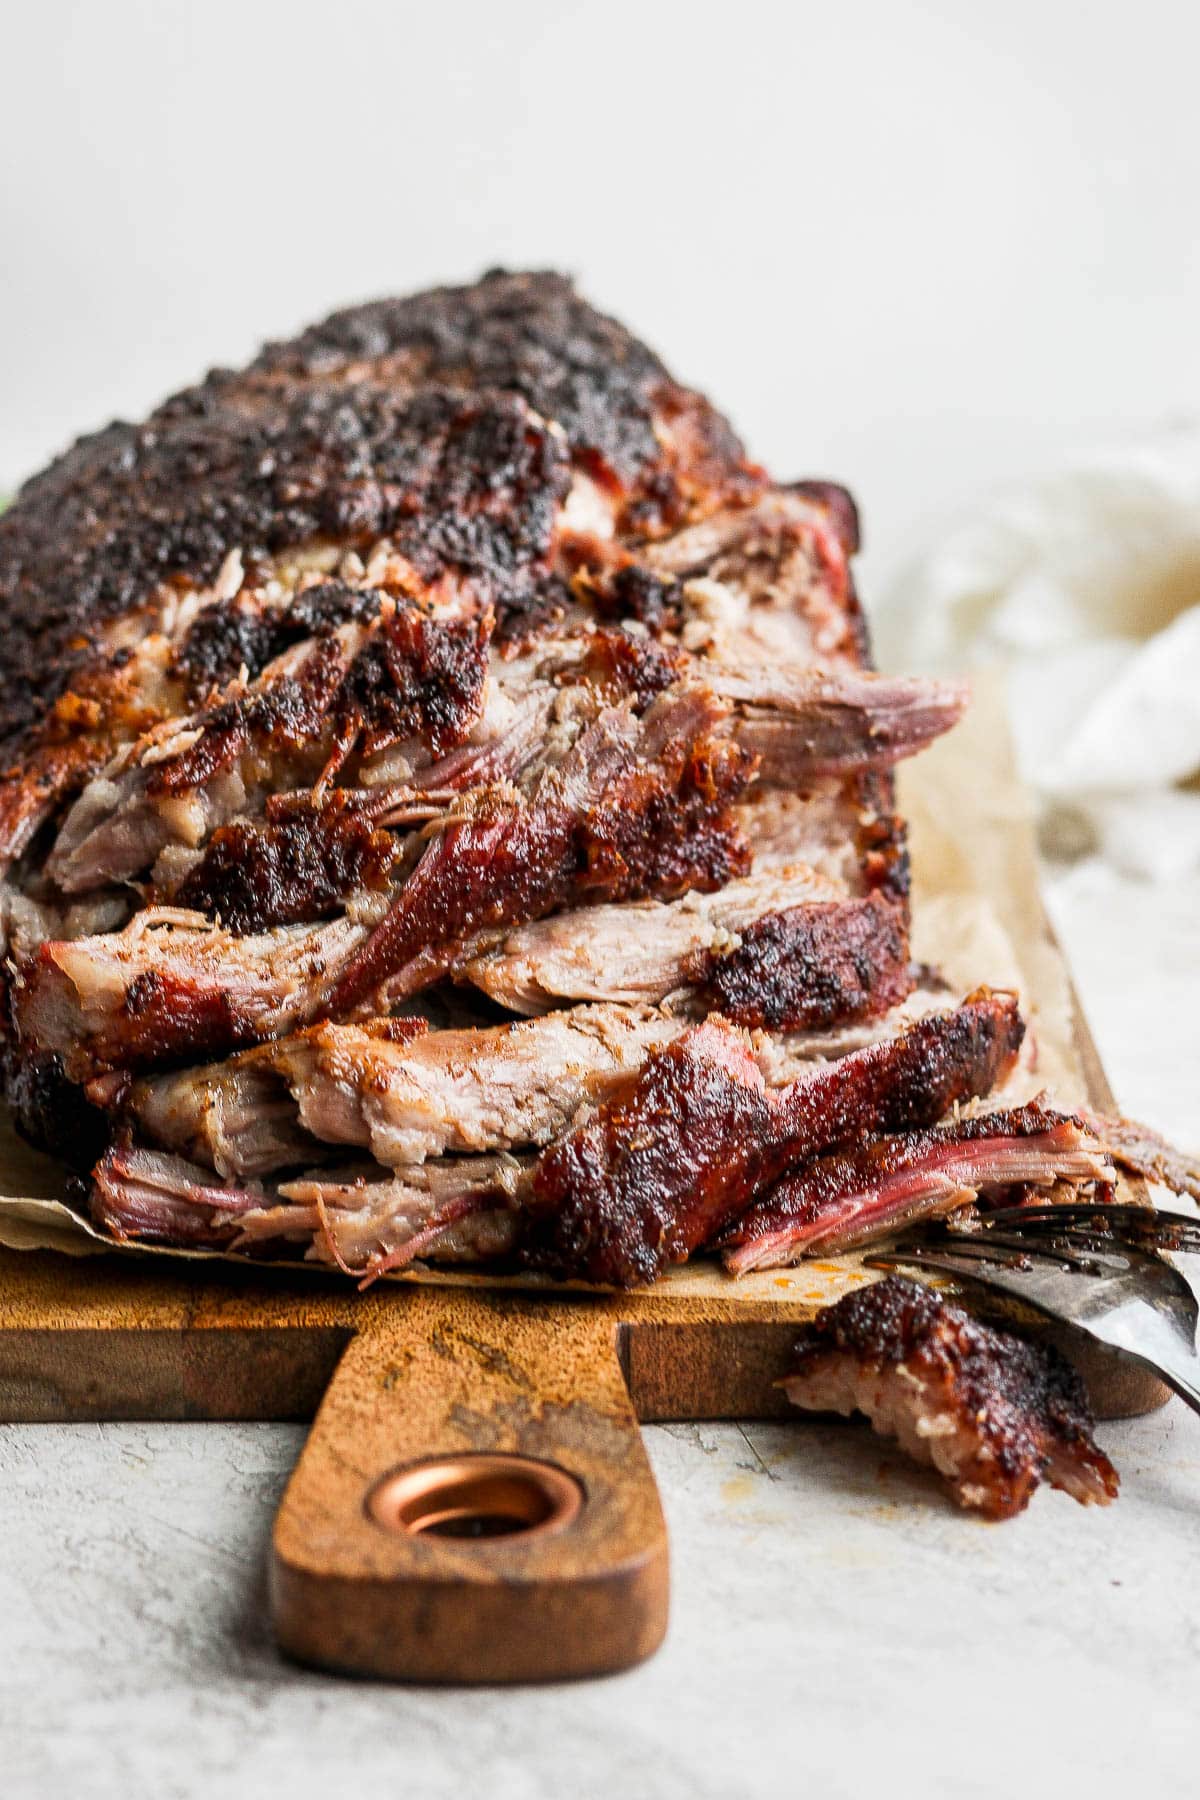 A smoked pork shoulder, partially shredded, sitting on a wooden board. 